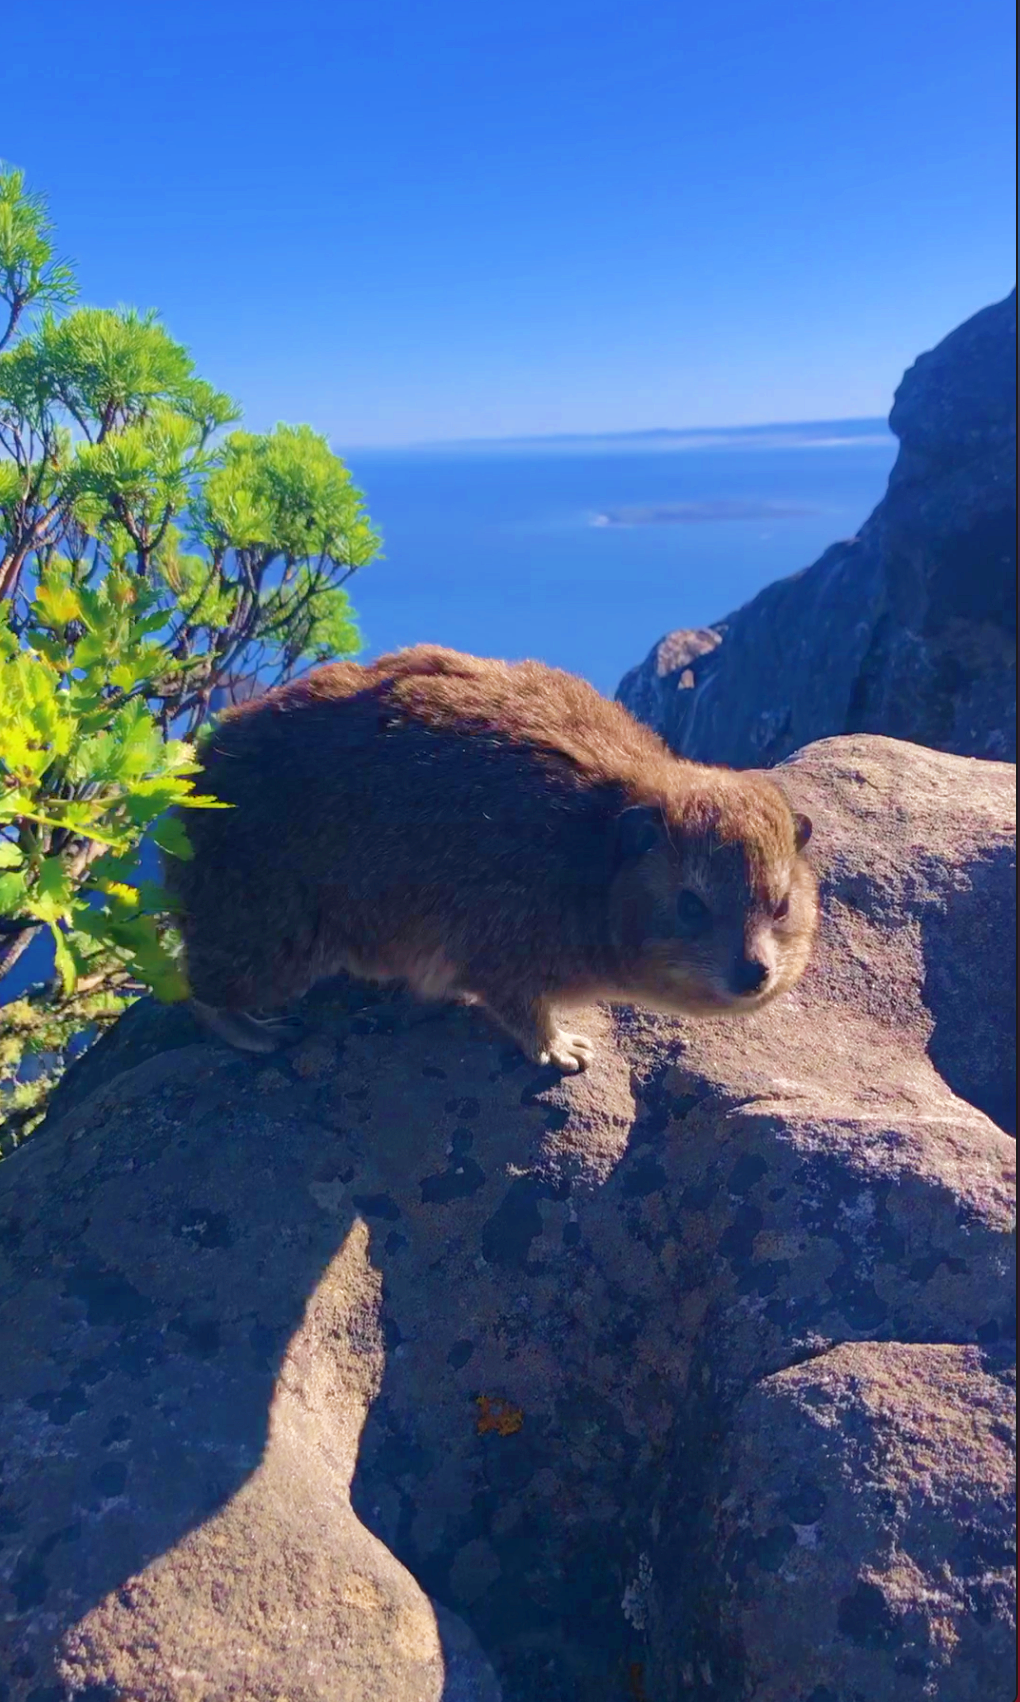 rock hyrax, also known as the dassie.   Despite its unassuming appearance, this small mammal holds a